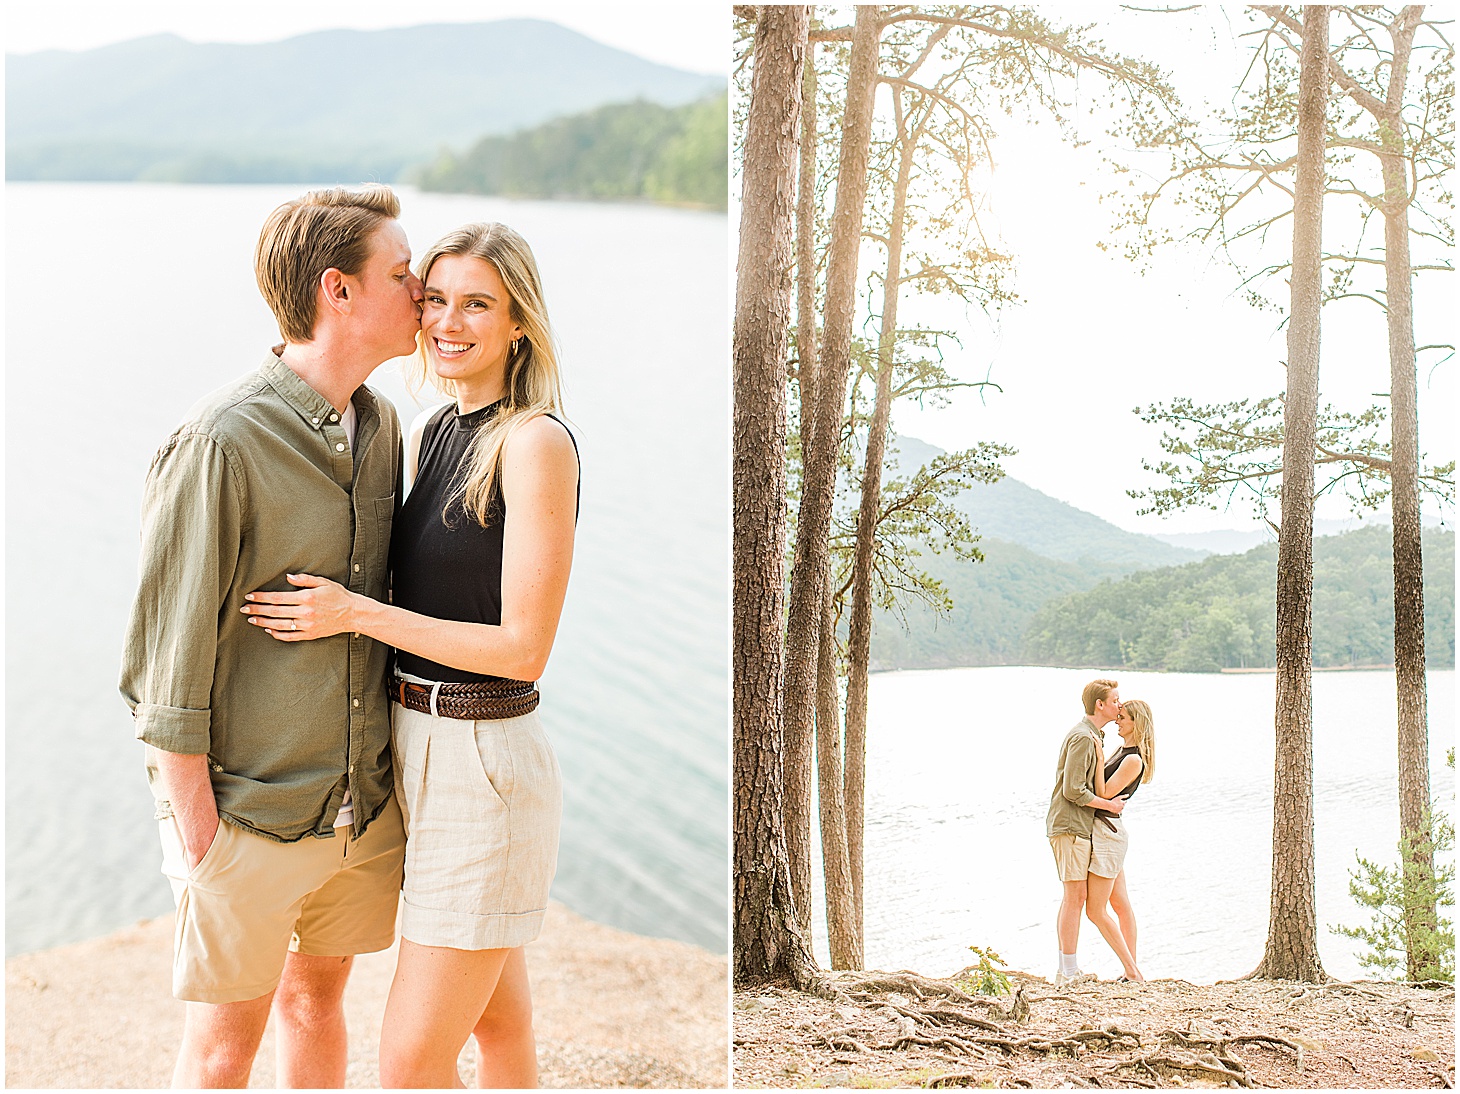 carvinscove_roanokeengagementsession_virginiaweddingphotographer_vaweddingphotographer_photo_0017-1.jpg